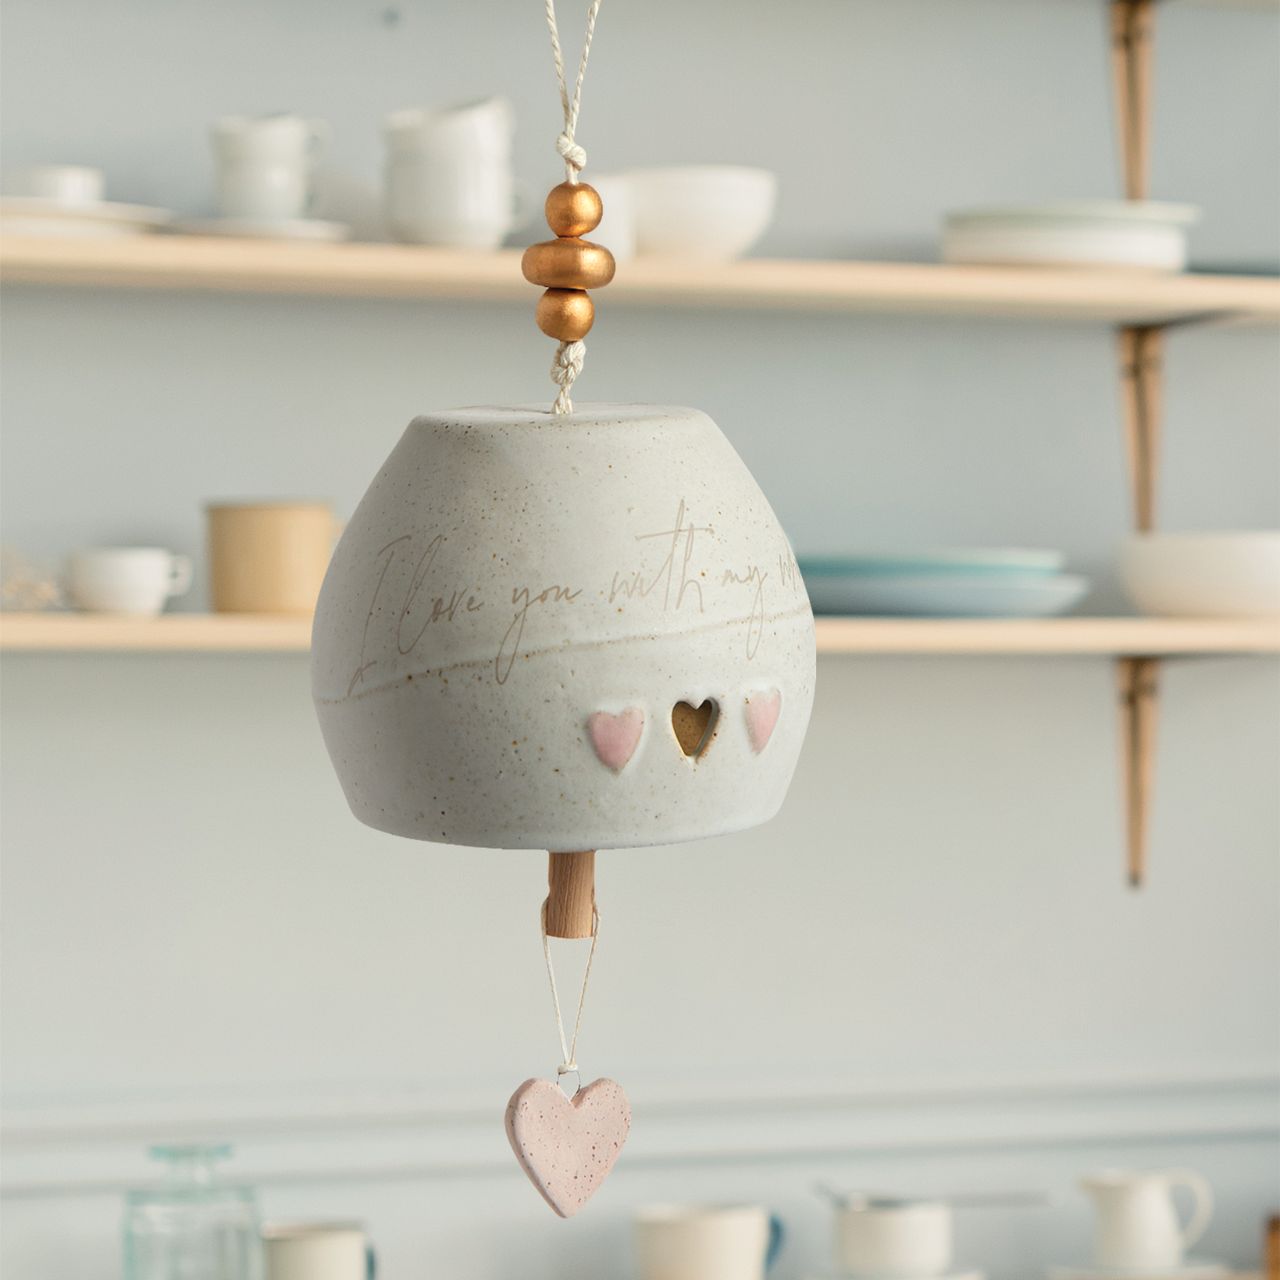 Inspired Bell - Love by Demdaco  Give beauty and relaxation with our Inspired Bells collection, a selection of artisan bells in soft, serene colours with soothing, gentle rings bearing sentiments of faith and love. Our Inspired Bell - Love is a ceramic indoor/outdoor bell in white with a heart pull and little heart-shaped cutouts. The sentiment on the bell reads, "I love you with my whole heart."